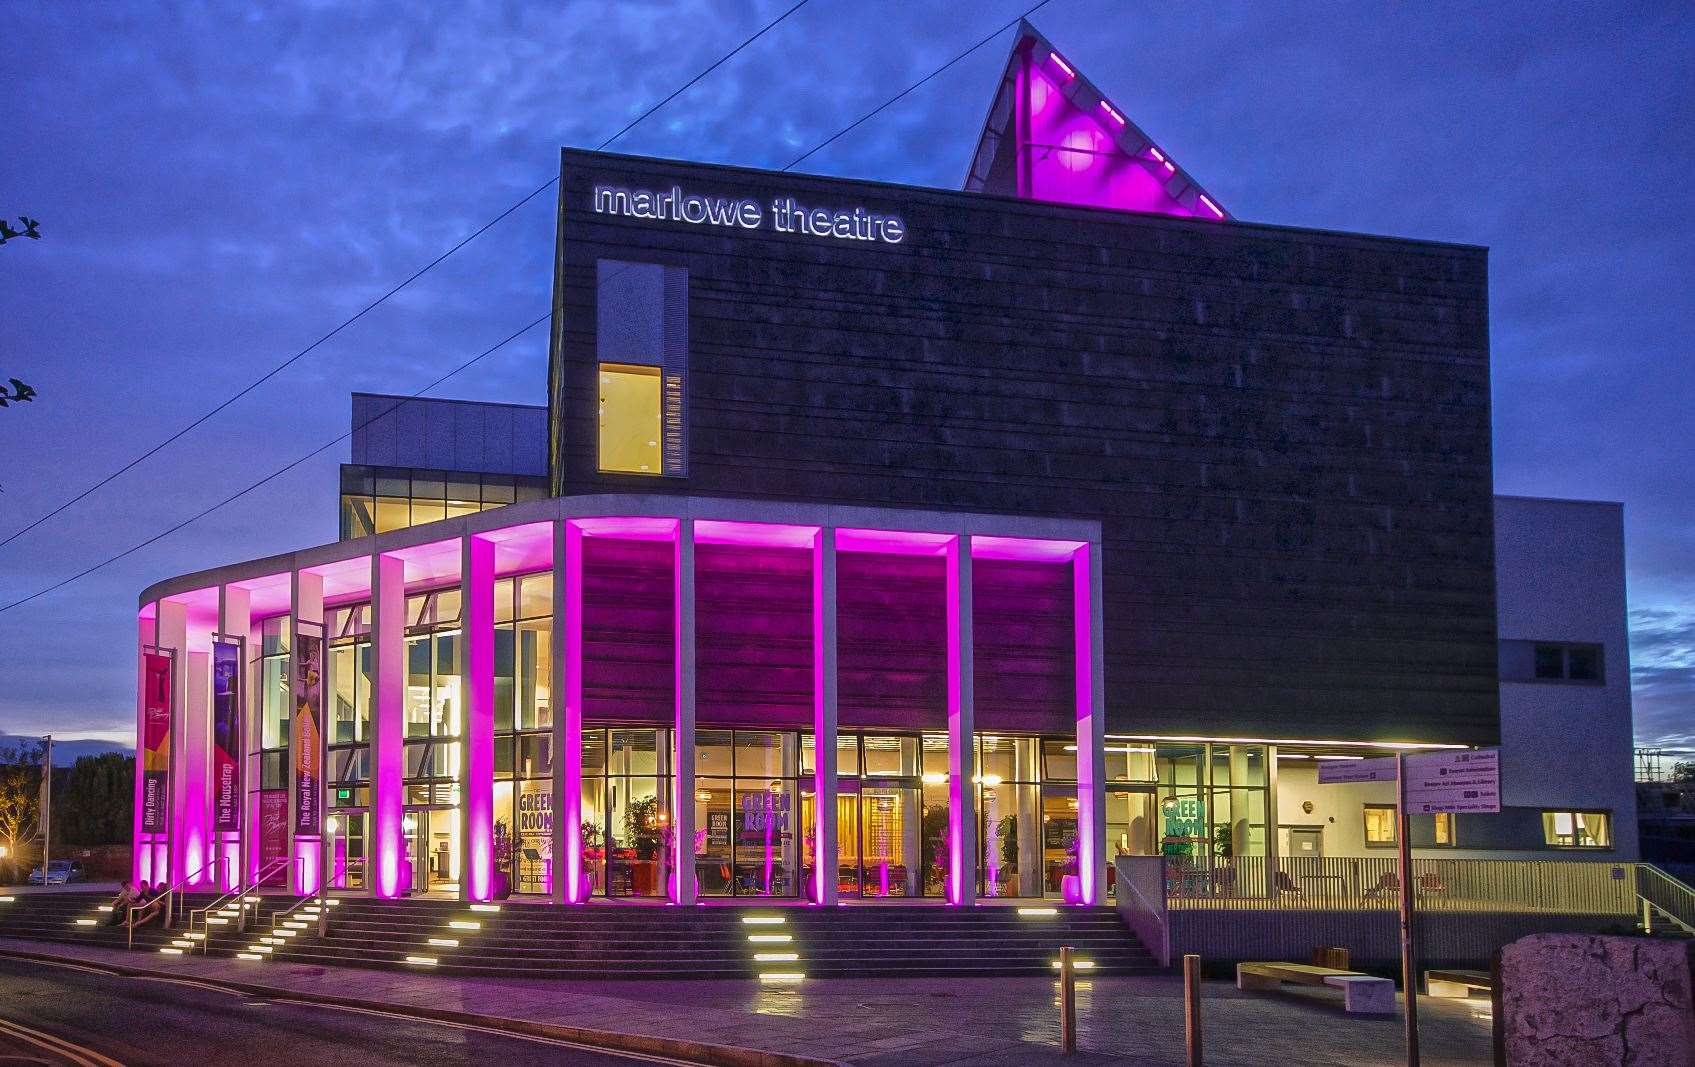 The Marlowe Theatre in Canterbury has closed as a result of the outbreak